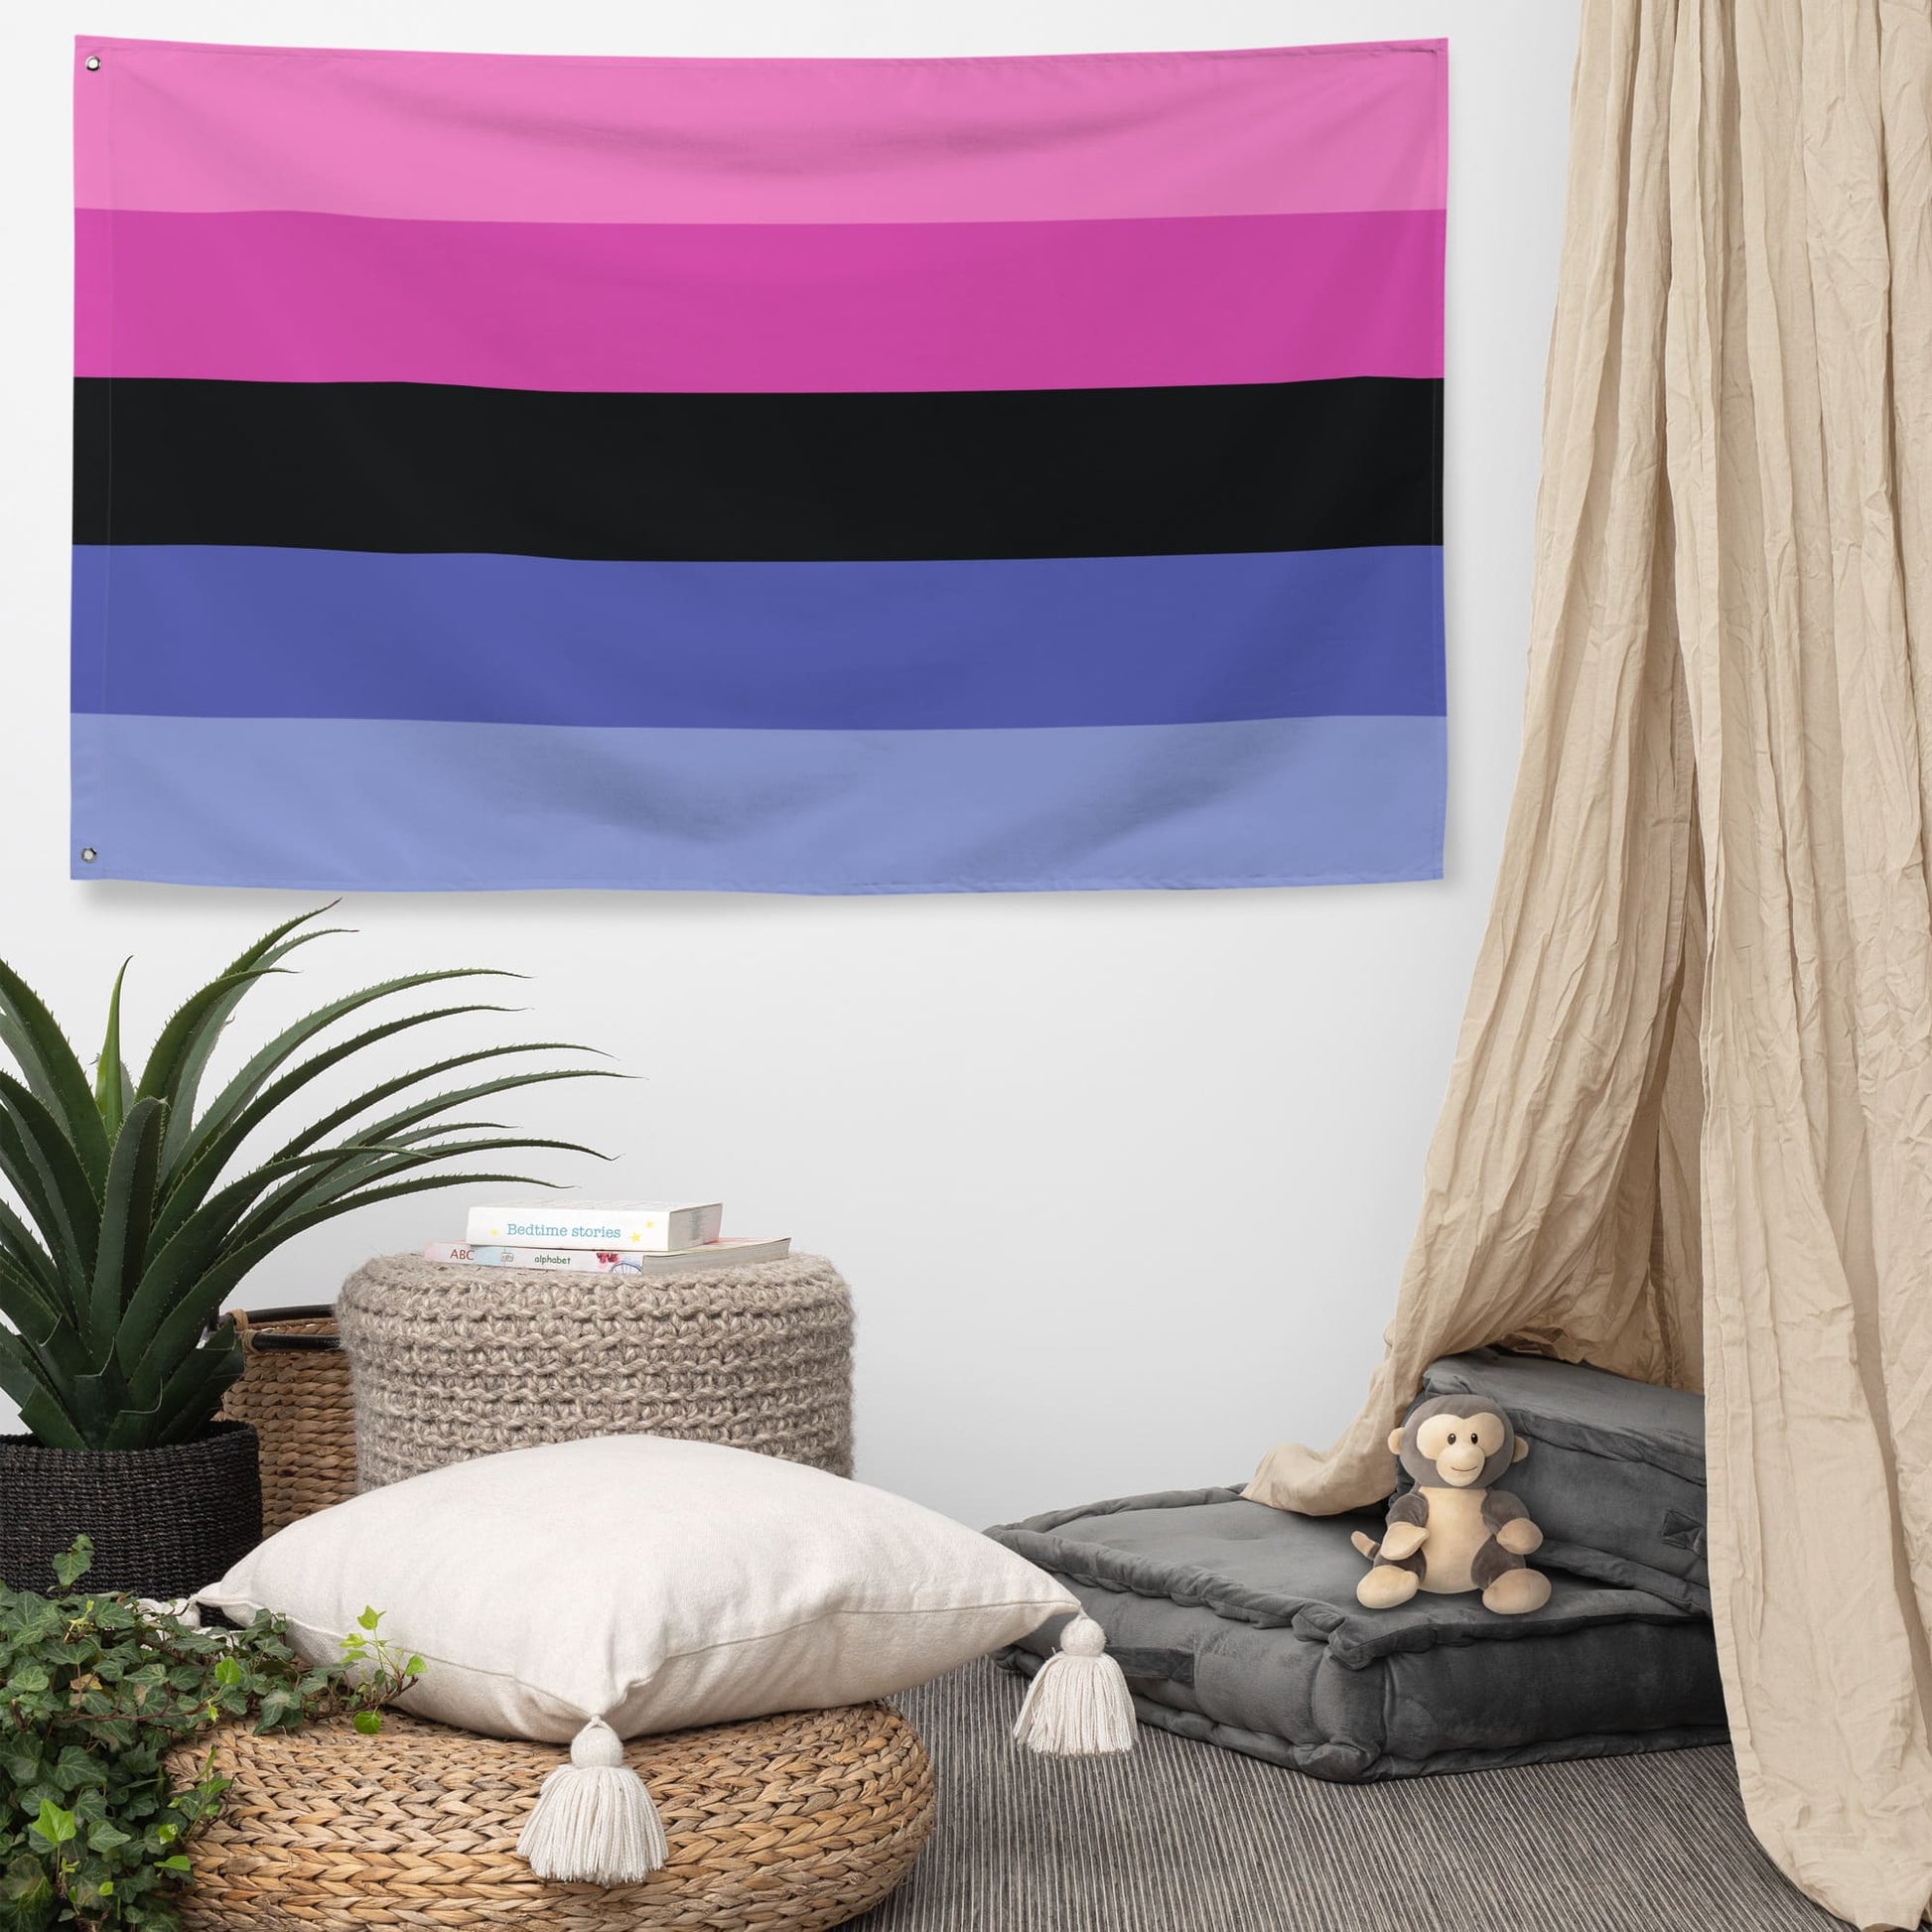 Omnisexual flag wall tapestry, in use